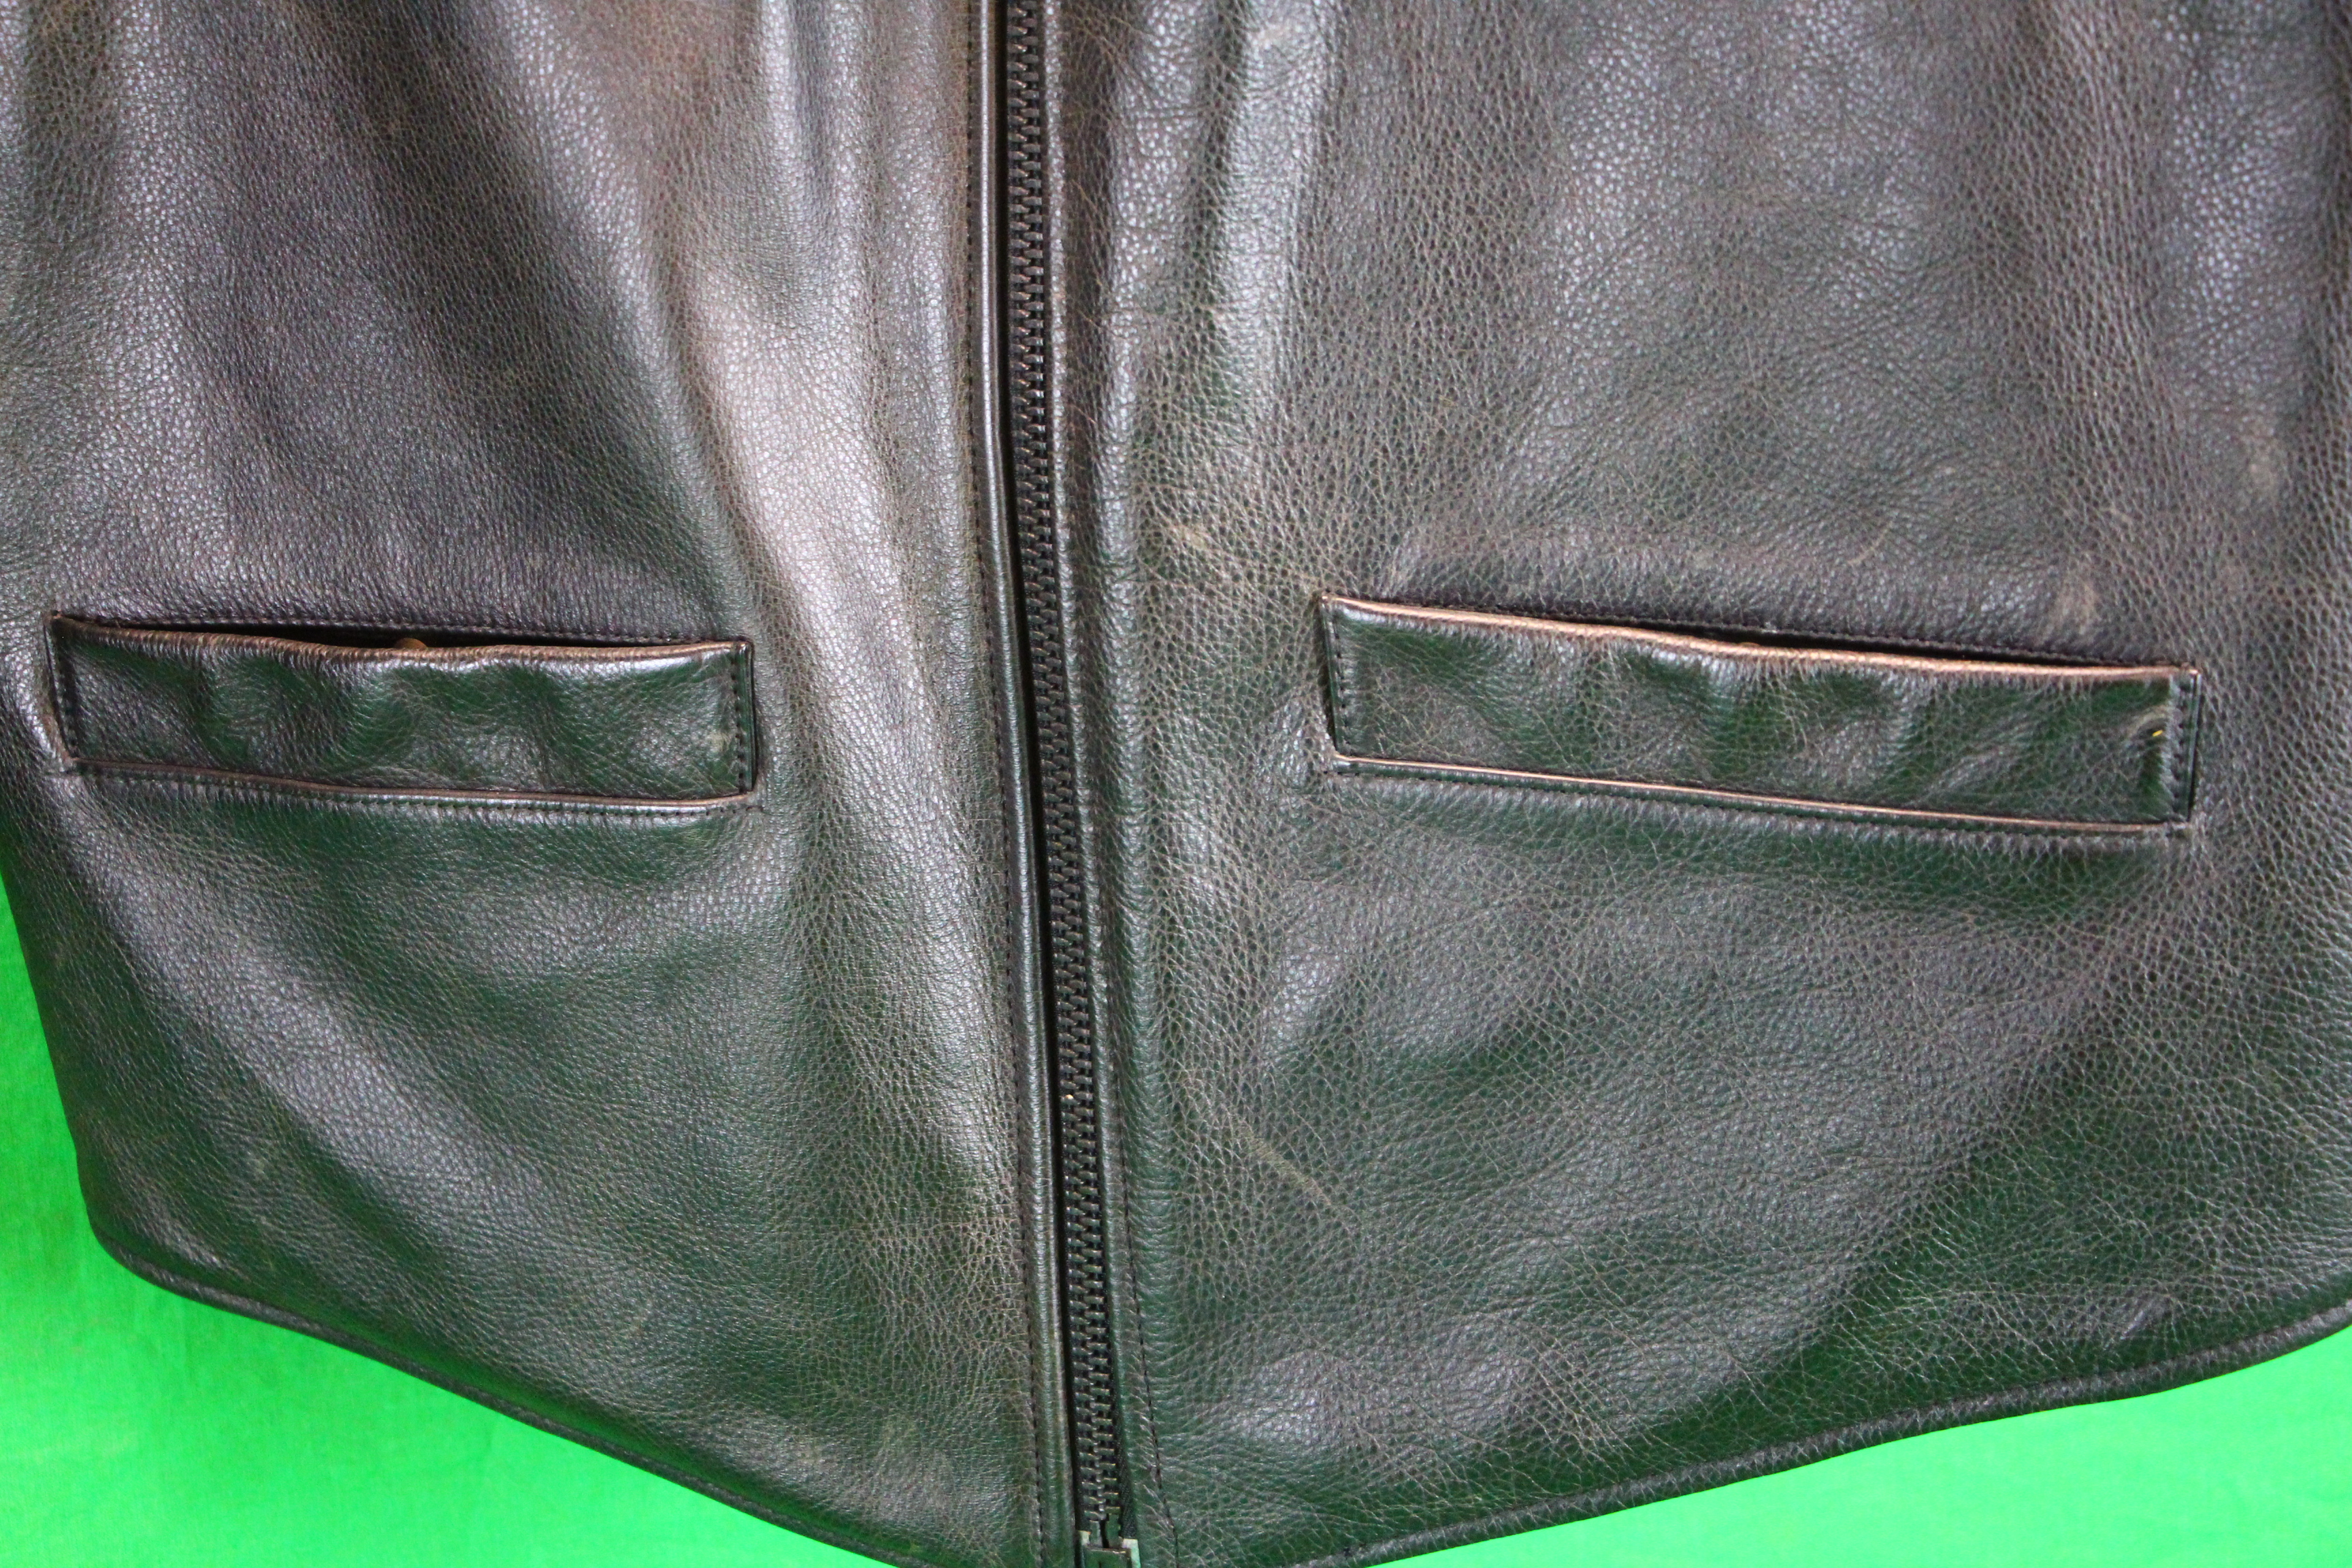 2 X HARLEY DAVIDSON BLACK LEATHER WAIST COATS SIZE L AND SIZE S - Image 4 of 6